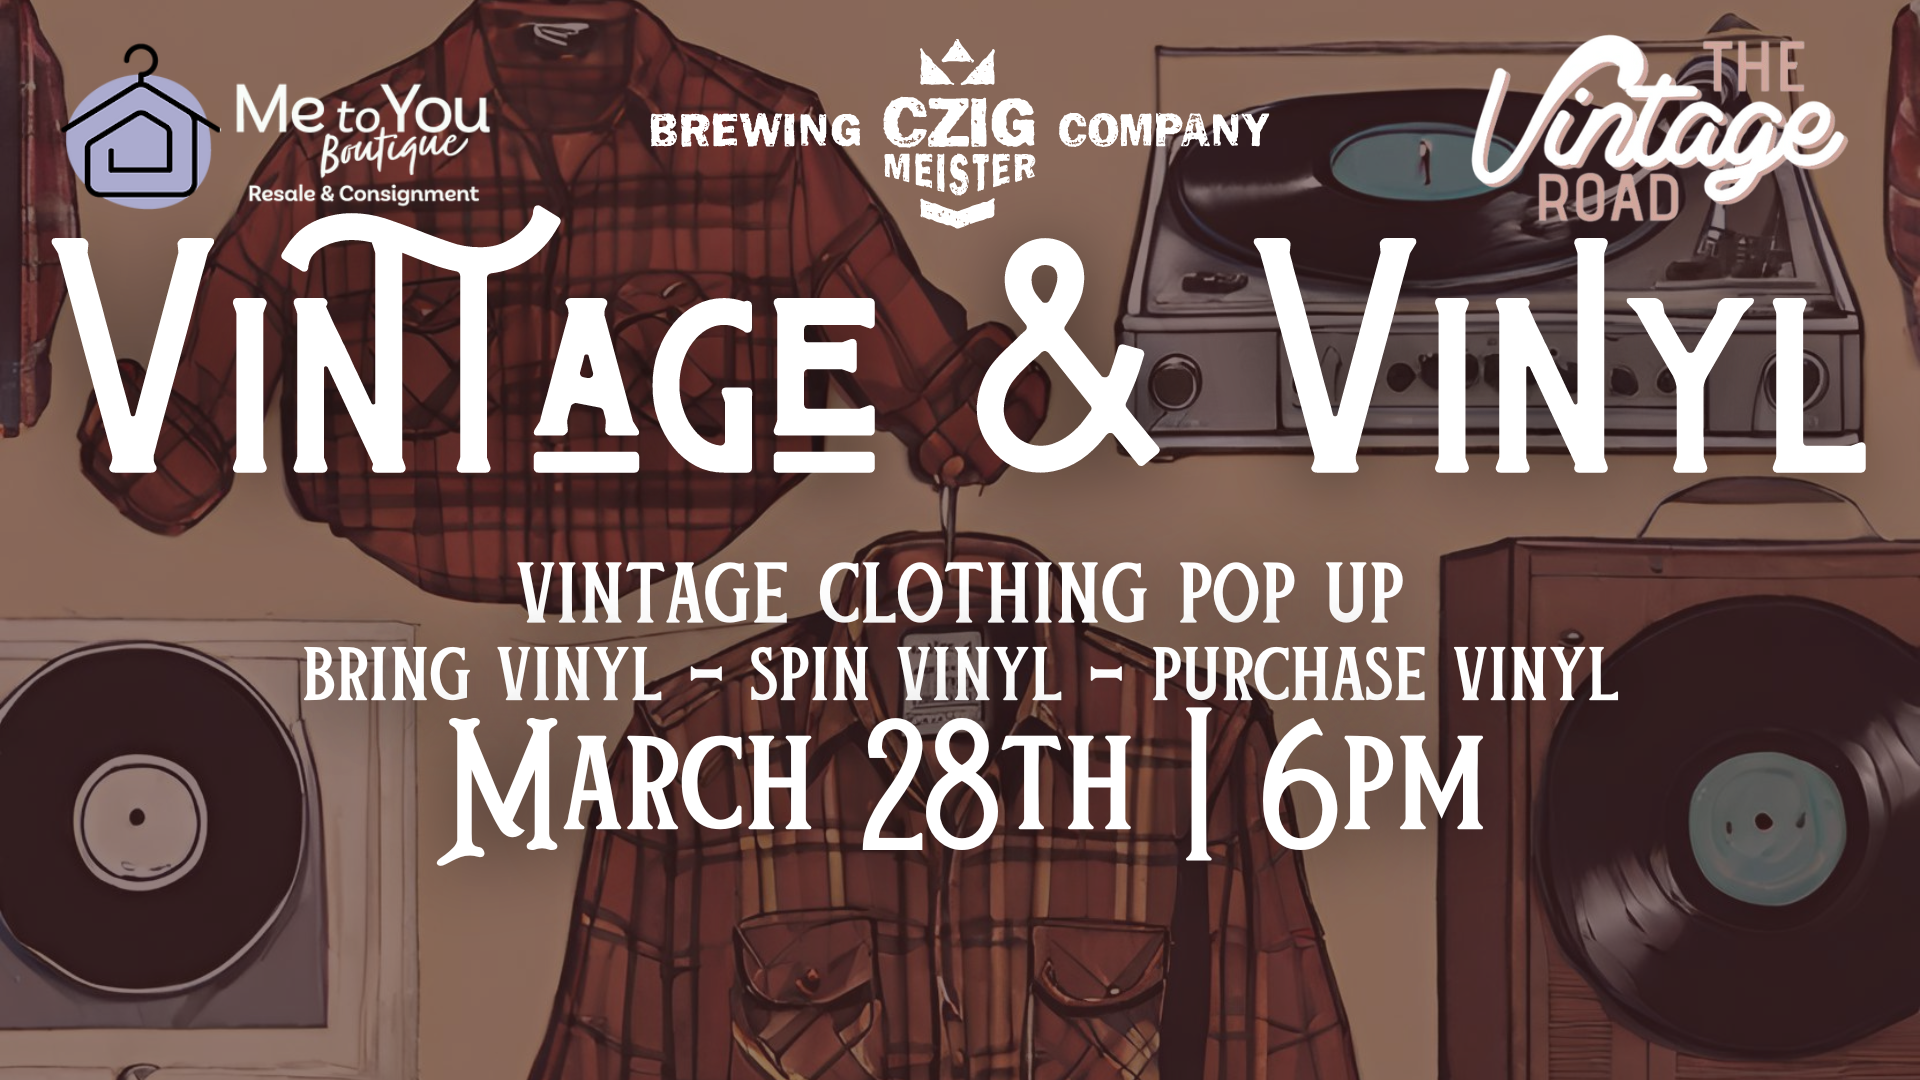 Vintage and Vinyl night on March 28th at Czig Meister Brewing Company